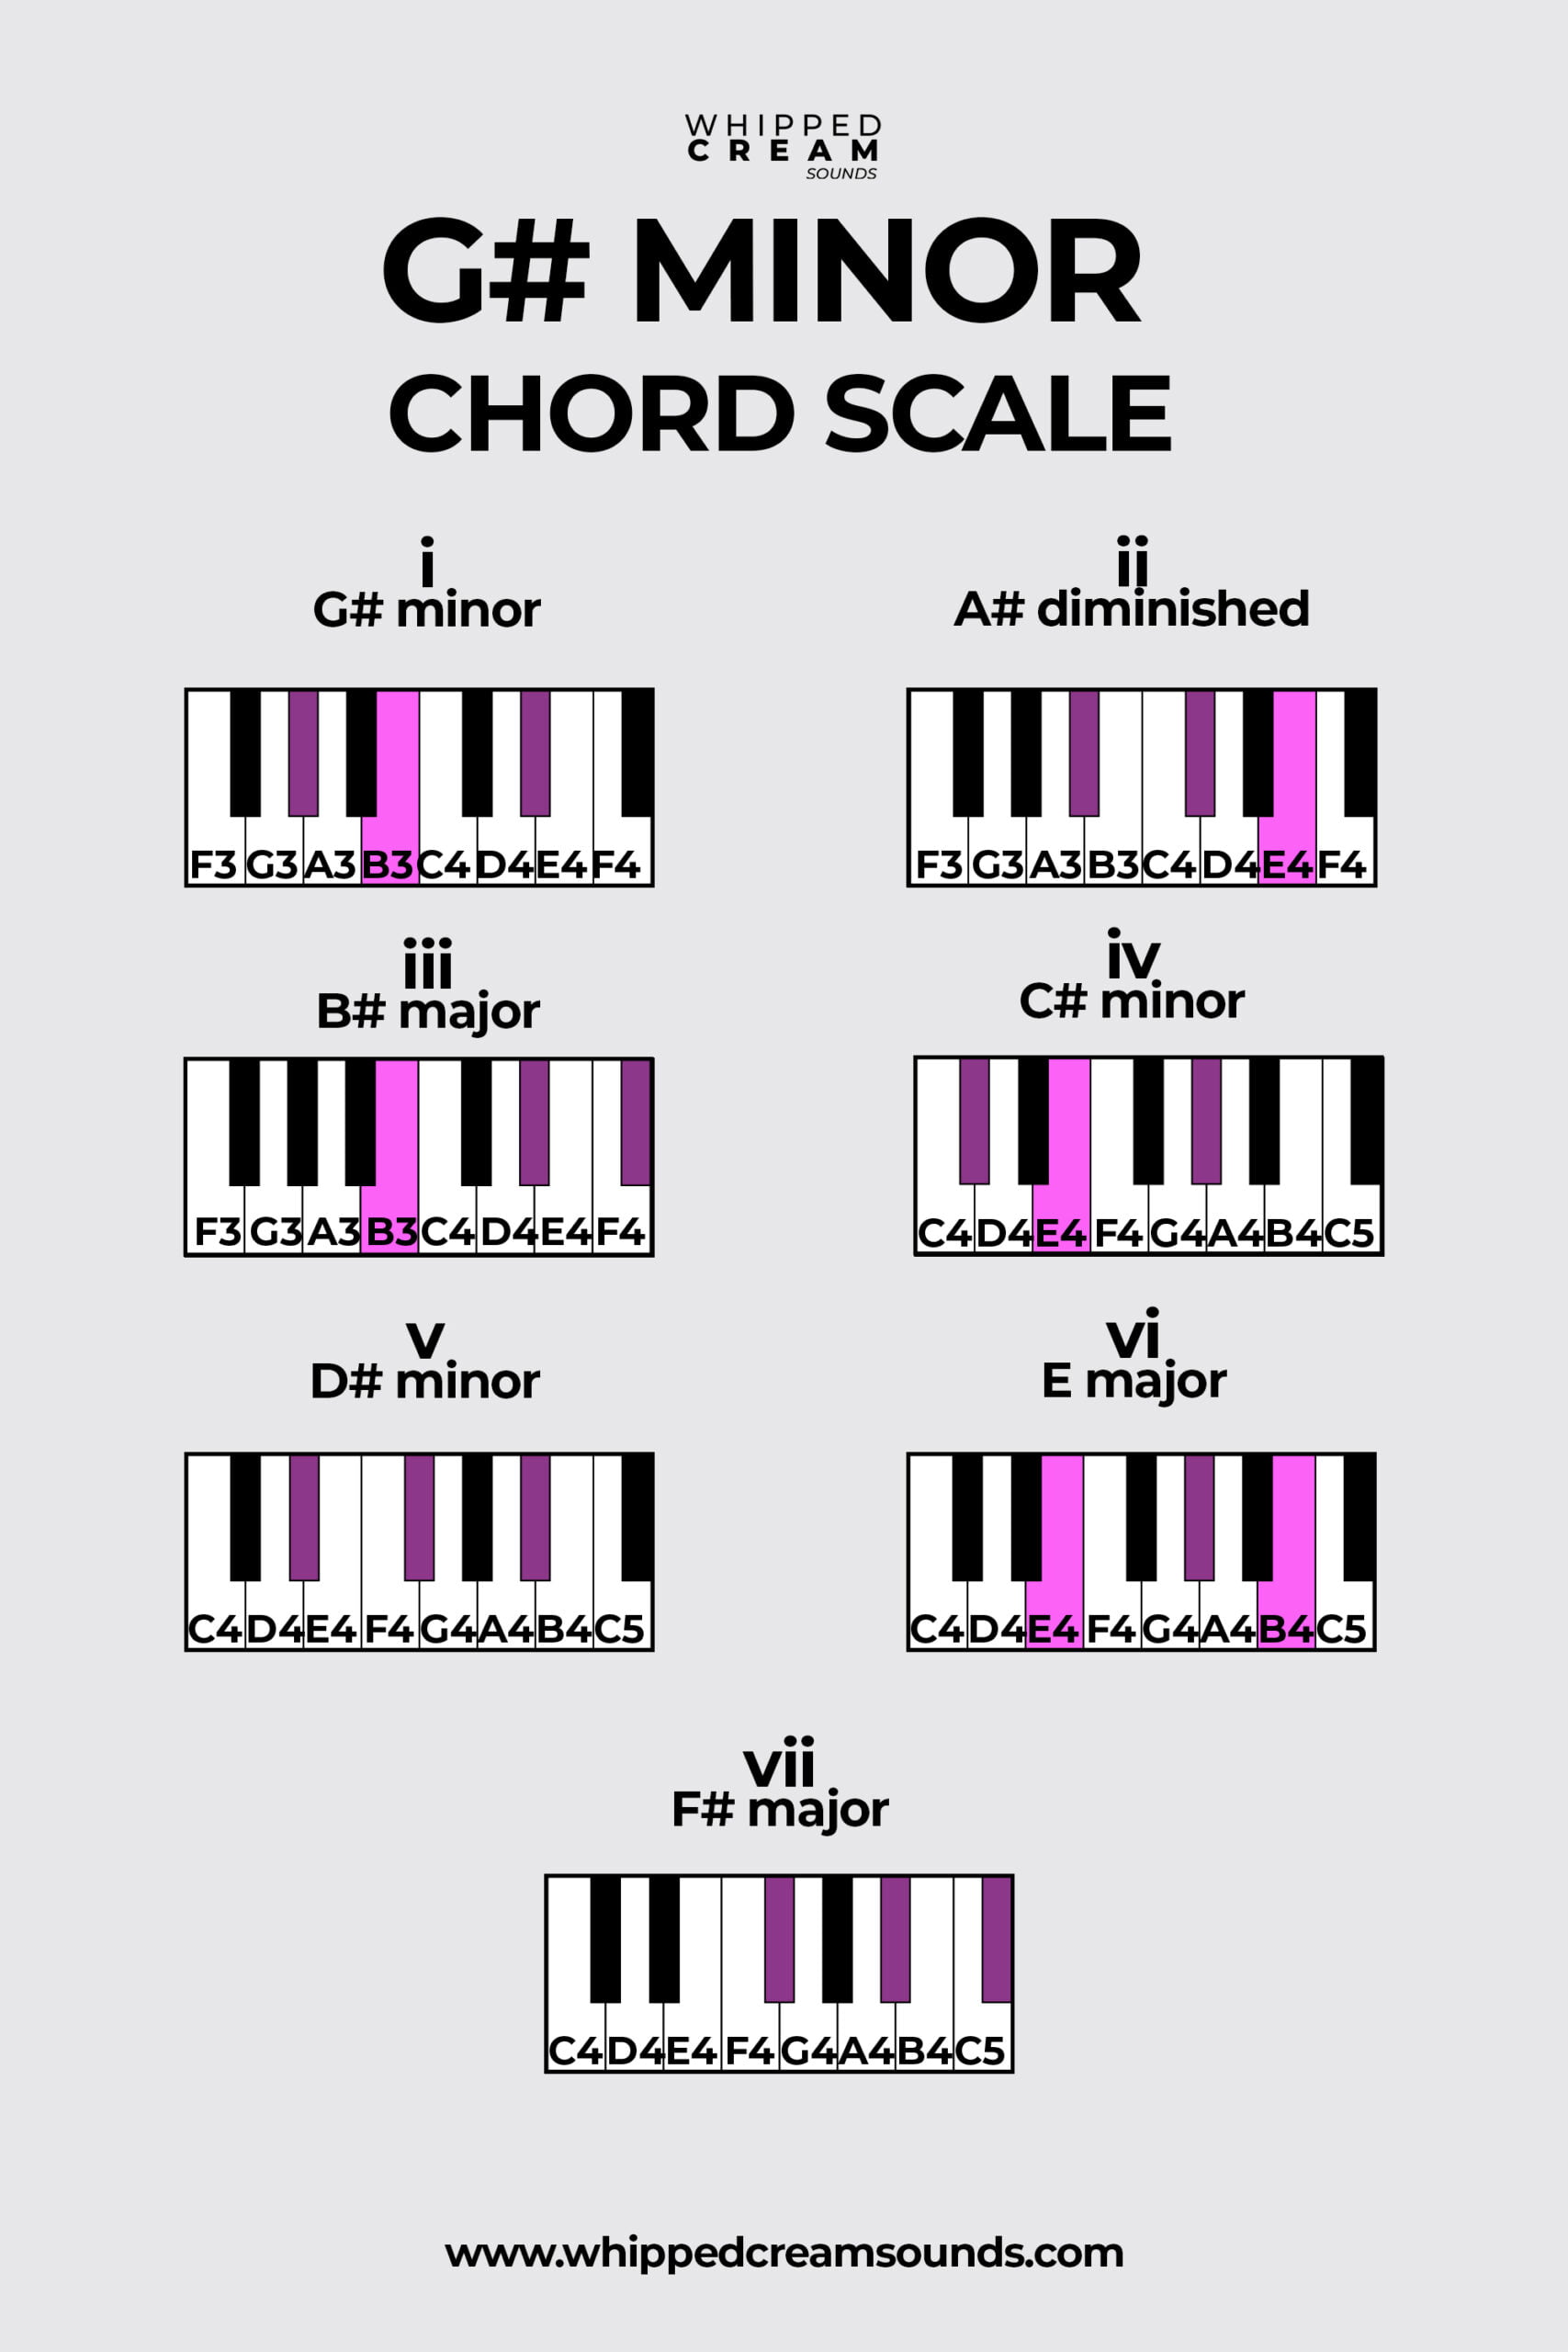 Ab Minor Chord Scale (G# Minor Chord Scale), Chords in The Key of A ...